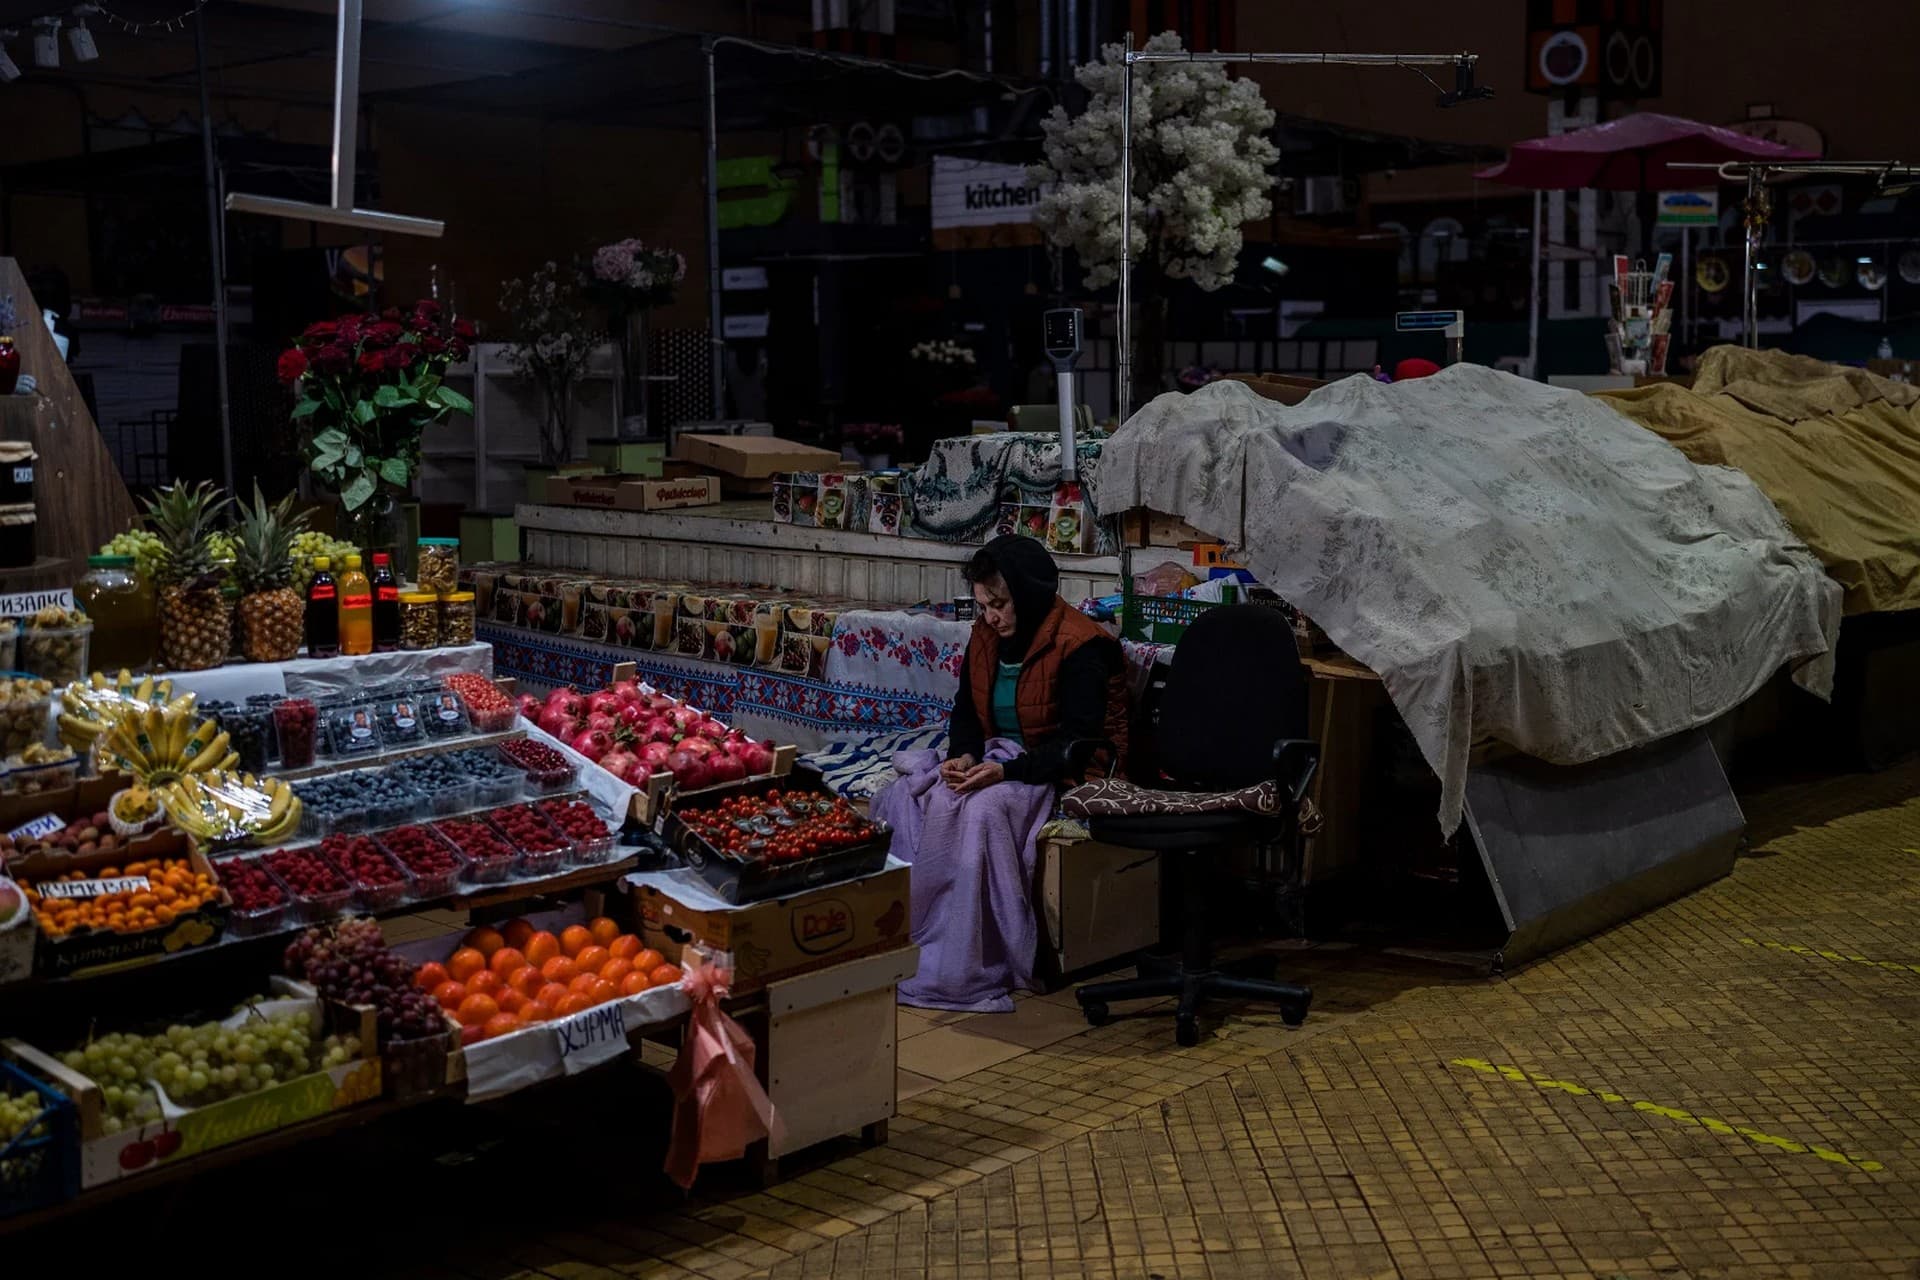 A fruit vendor waits for customers inside a market in Kyiv